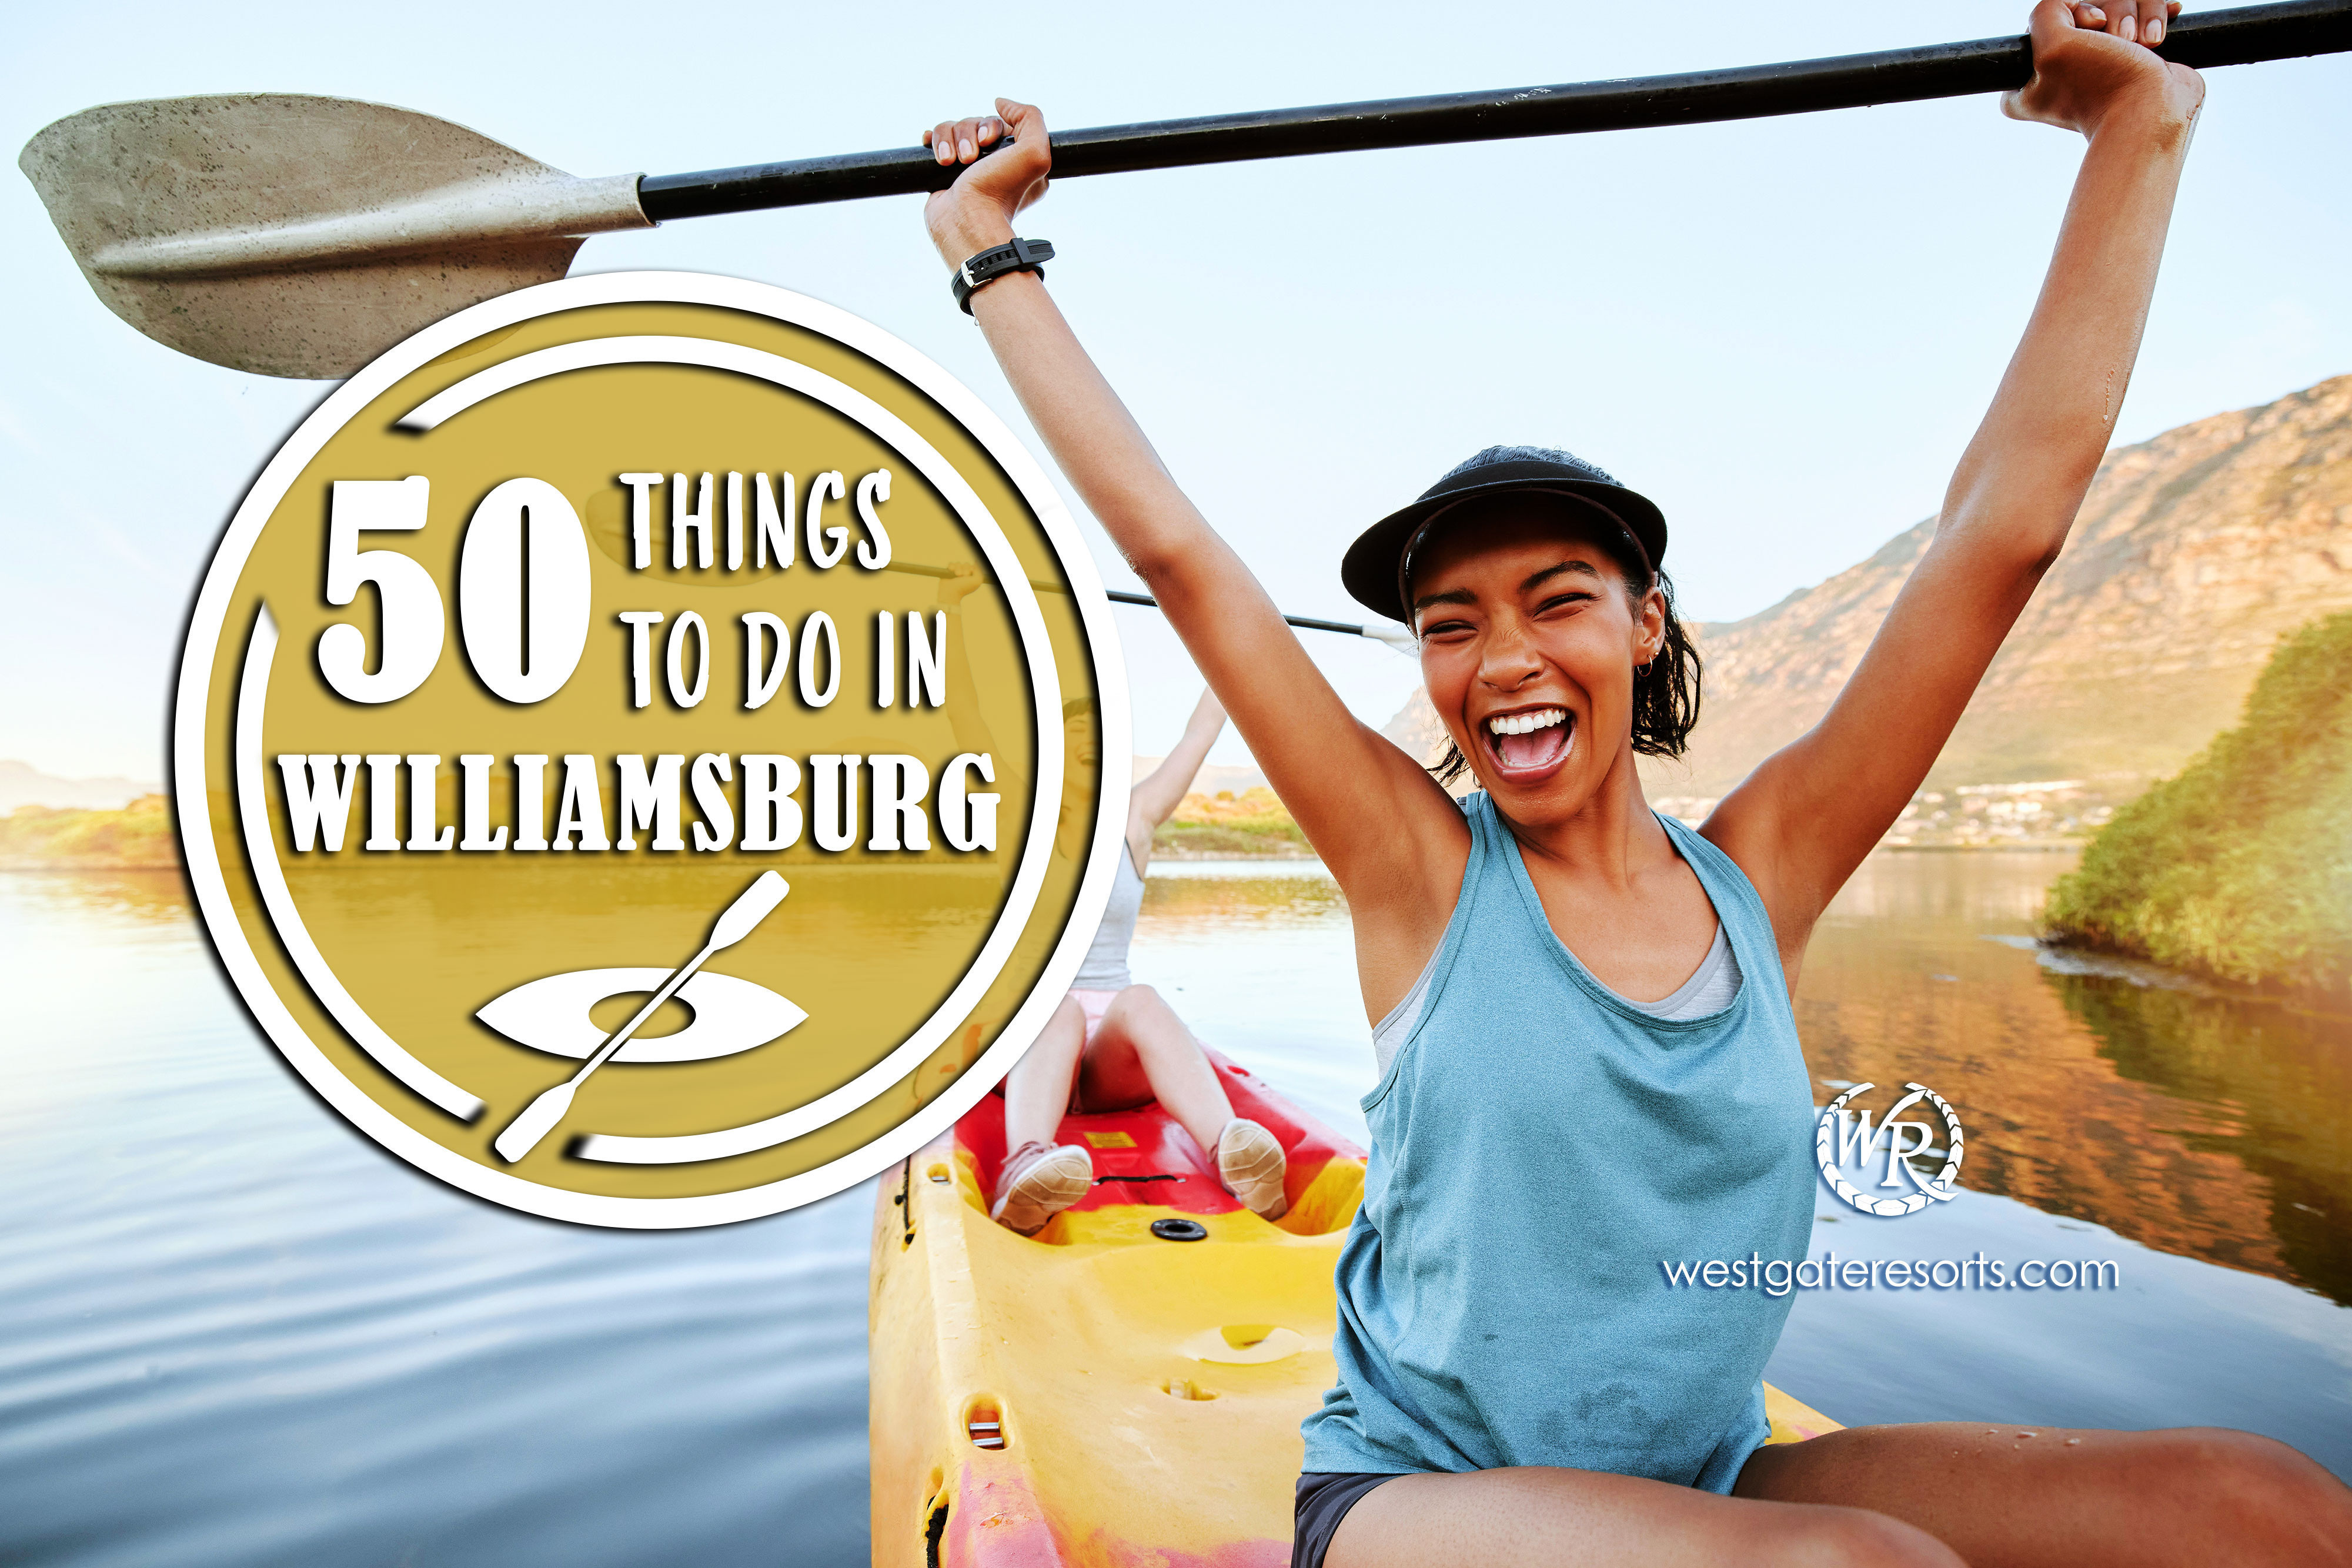 50 Things to Do in Williamsburg